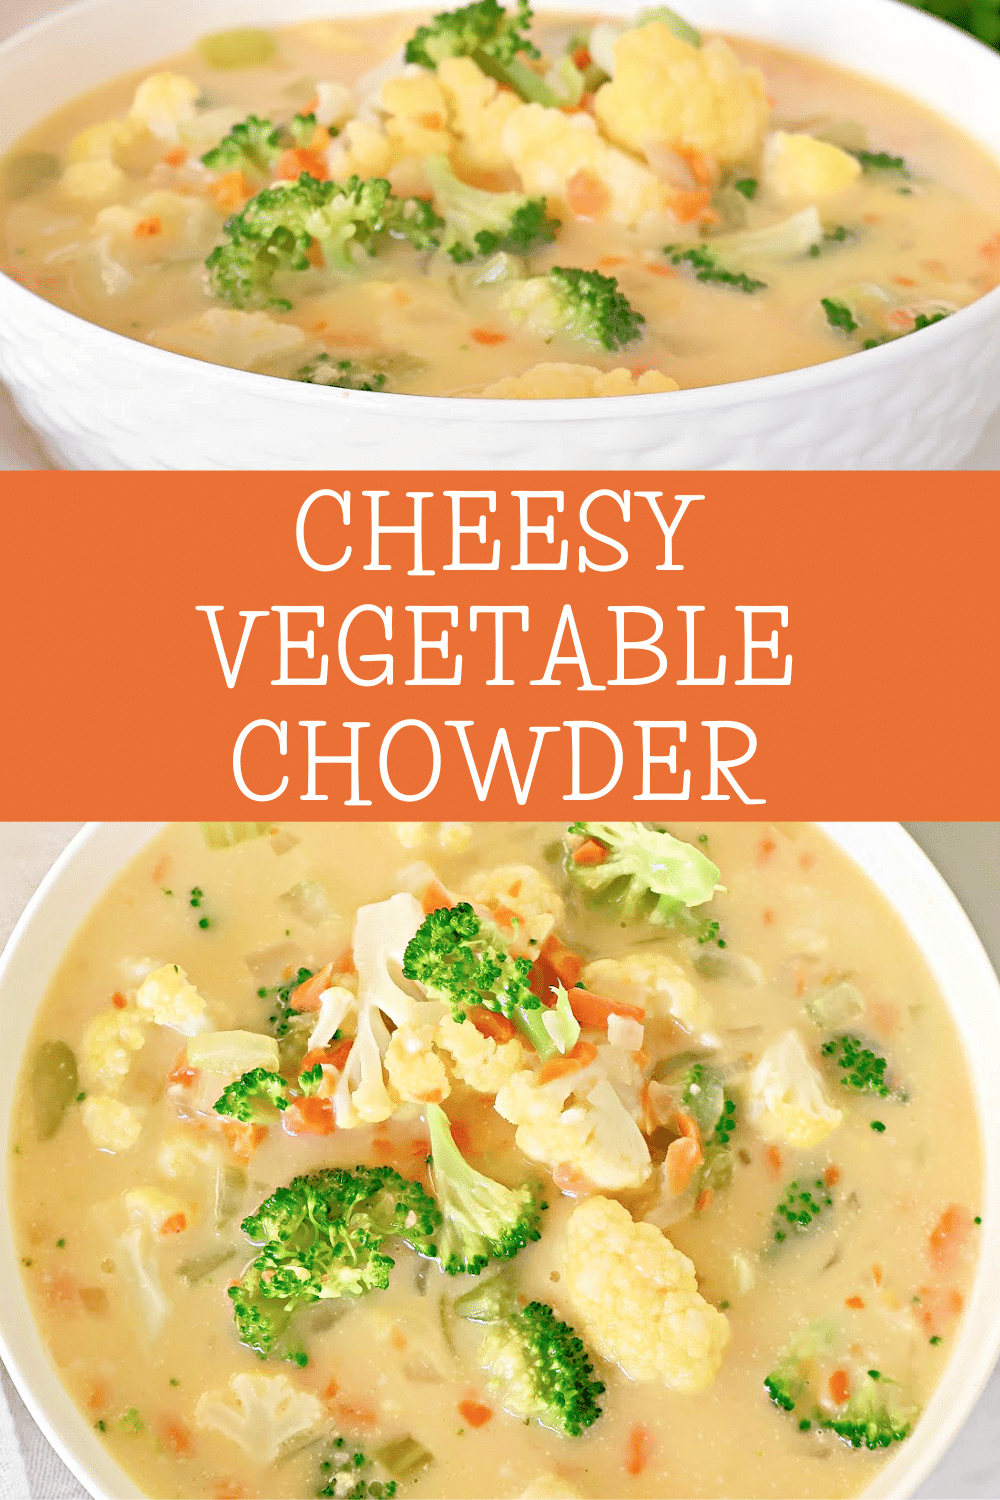 Cheesy Vegetable Chowder ~ A quick and comforting vegetable chowder packed with cheddar cheese and a medley of fresh vegetables. Vegan or Vegetarian. via @thiswifecooks